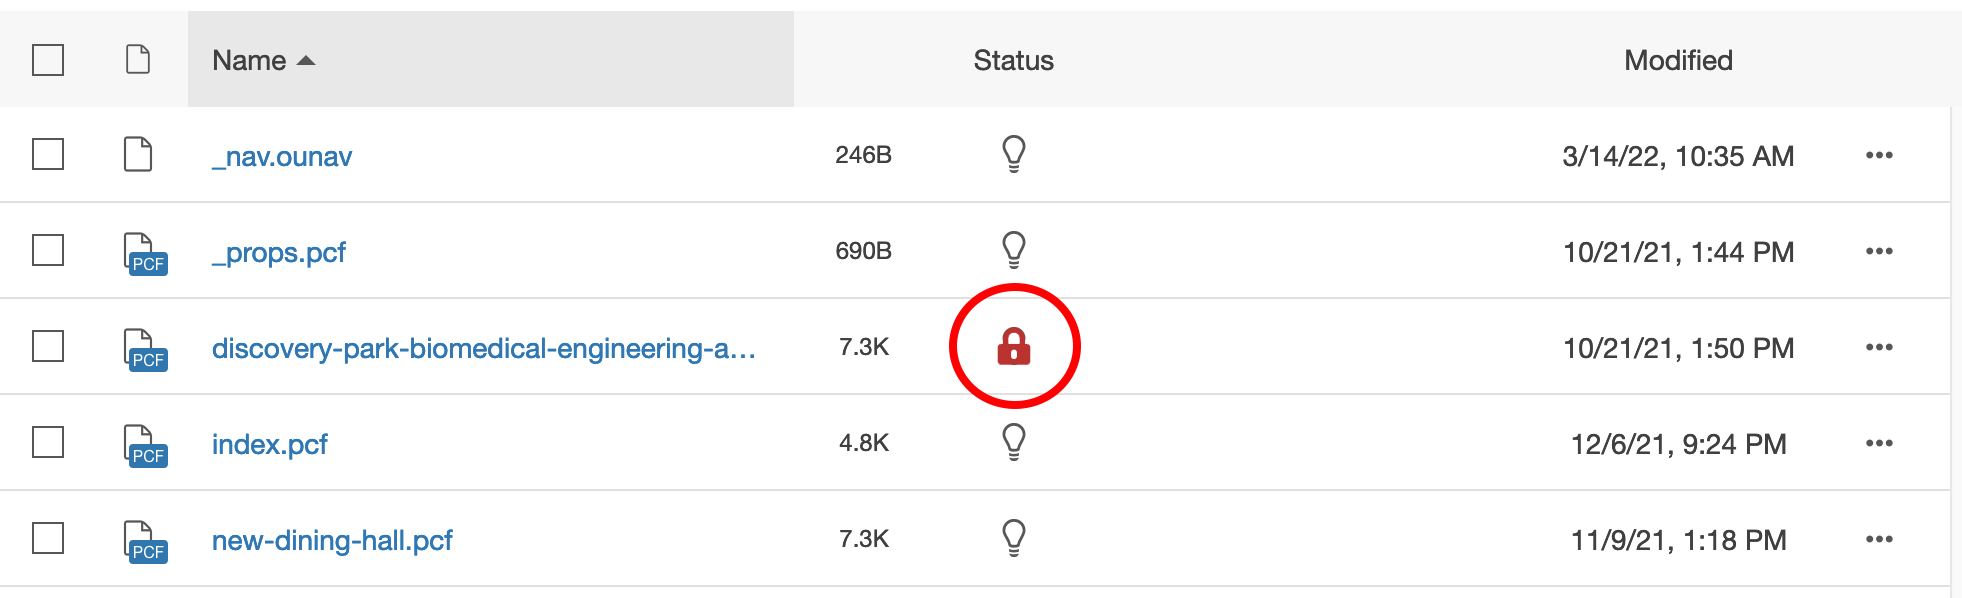 The red lock icon indicates another user has checked out the page for editing.